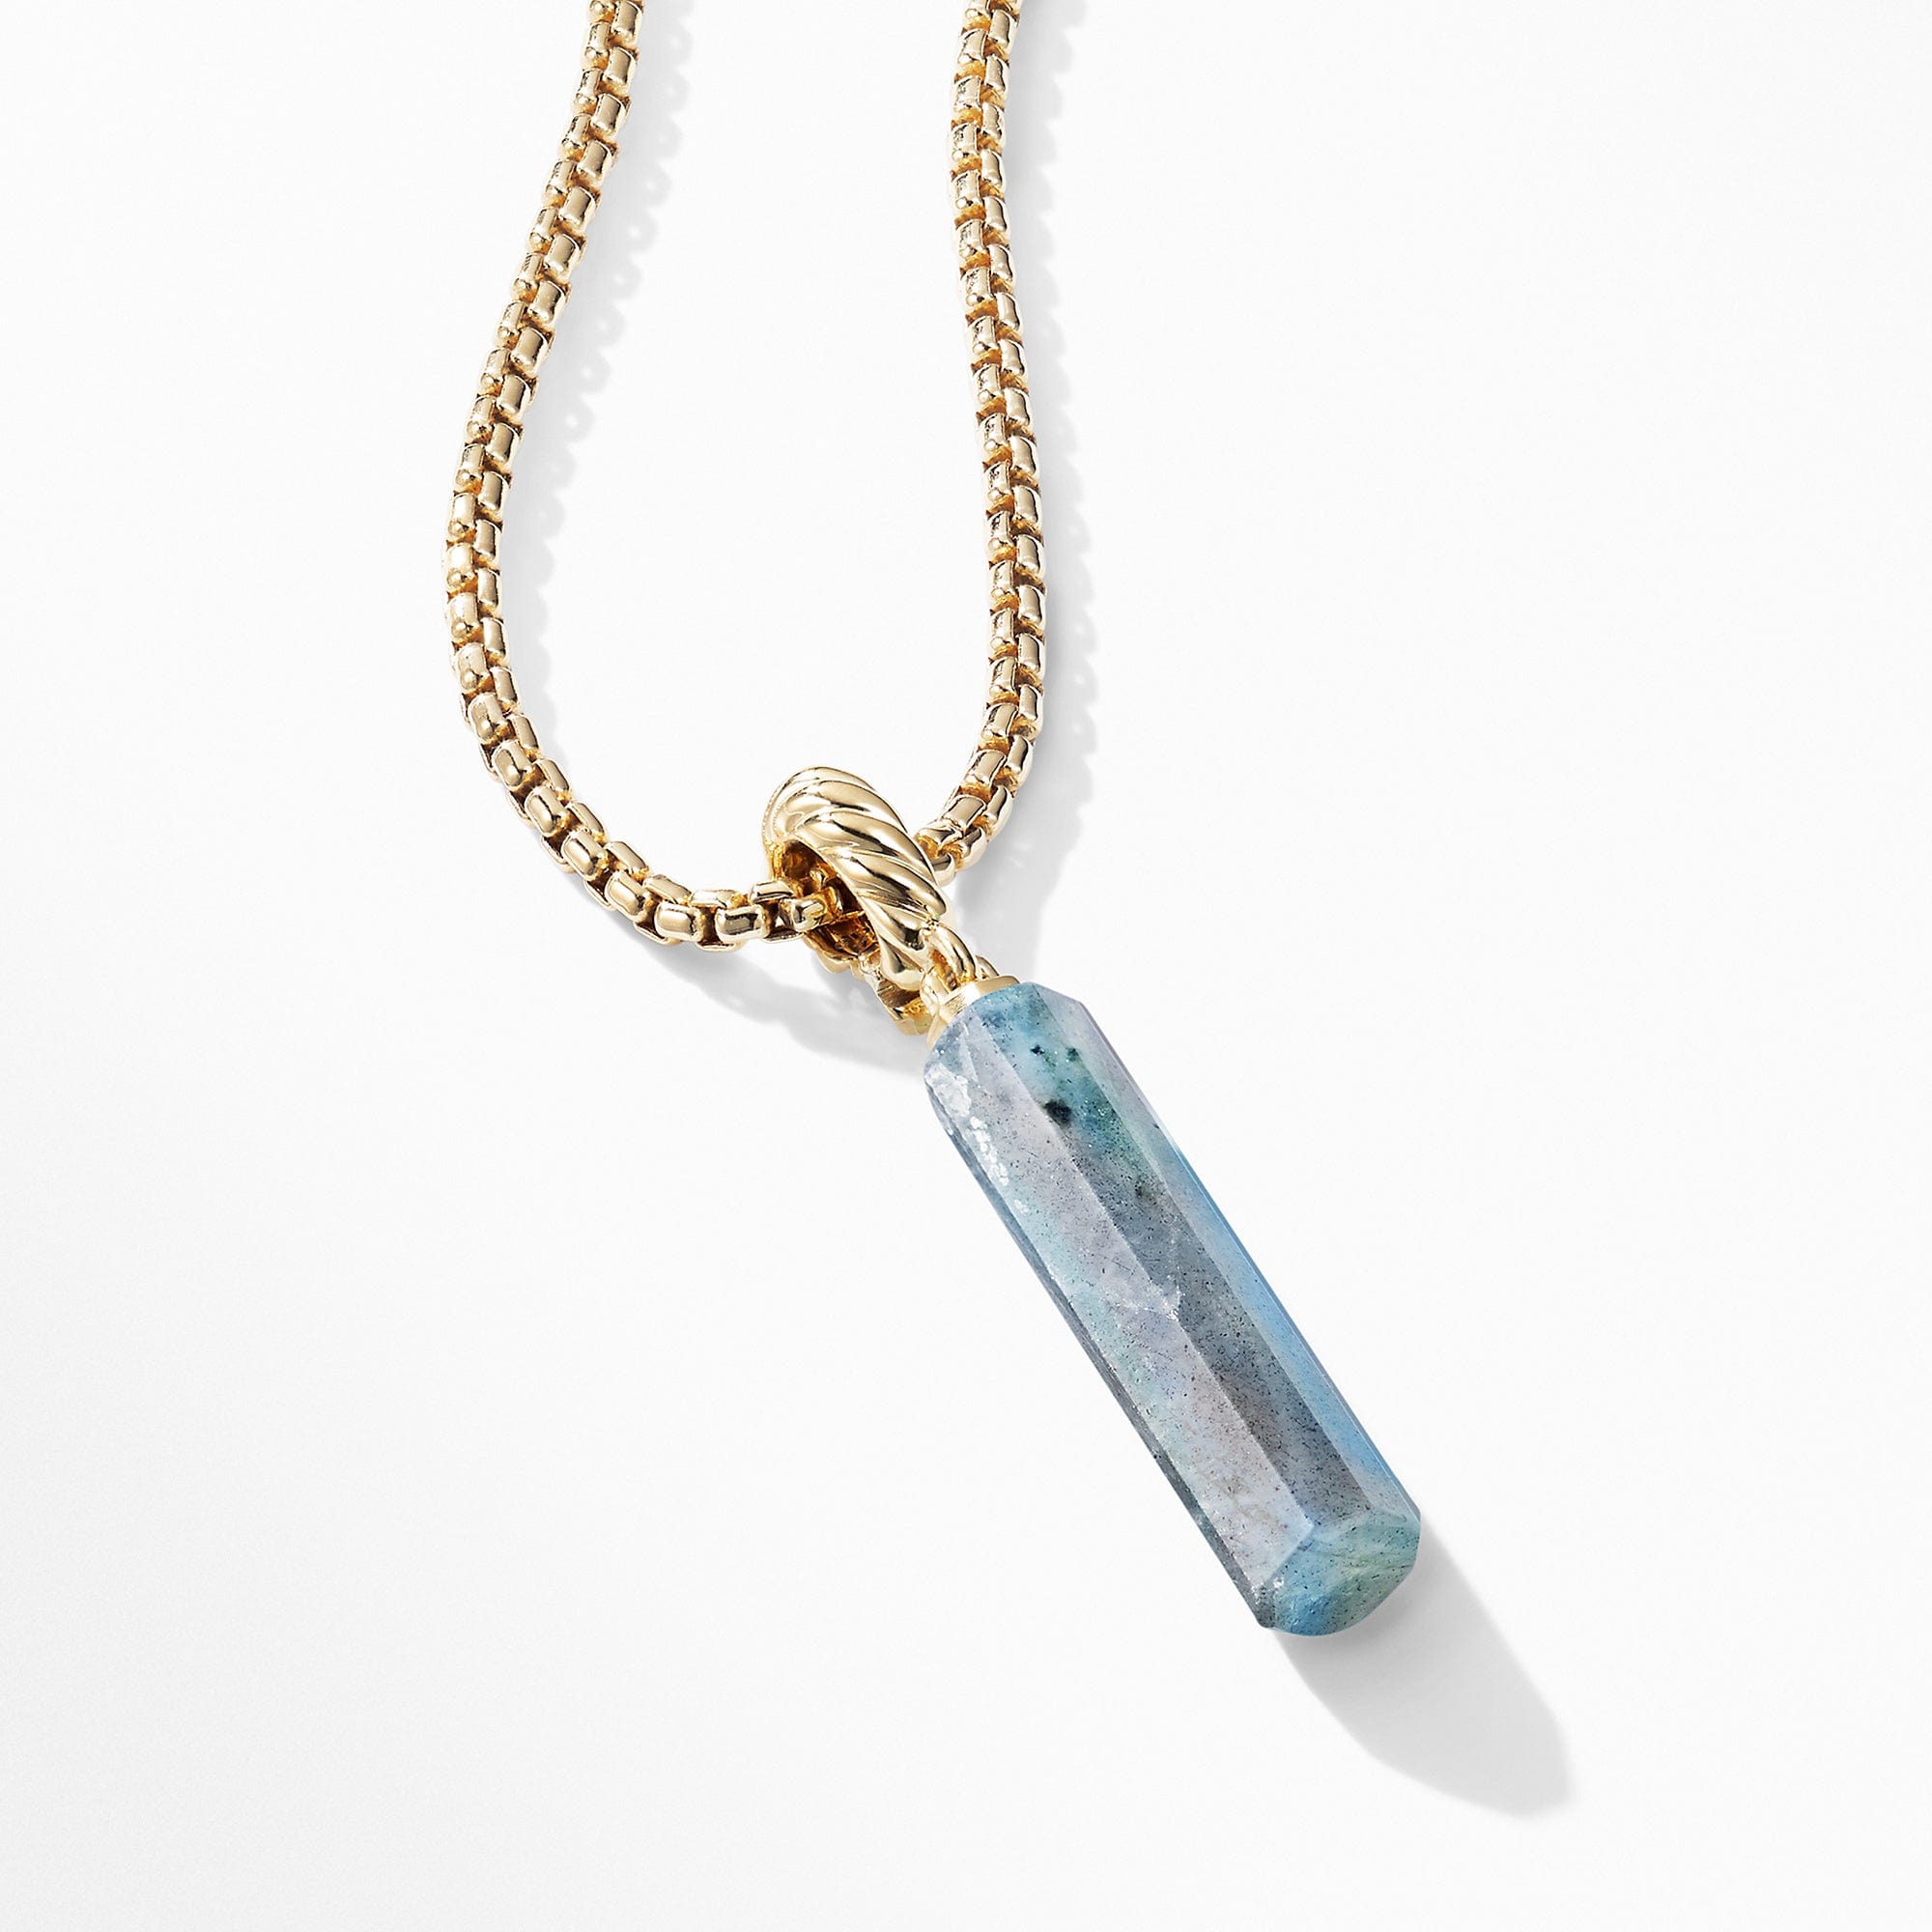 Barrel Charm in Labradorite with 18K Gold